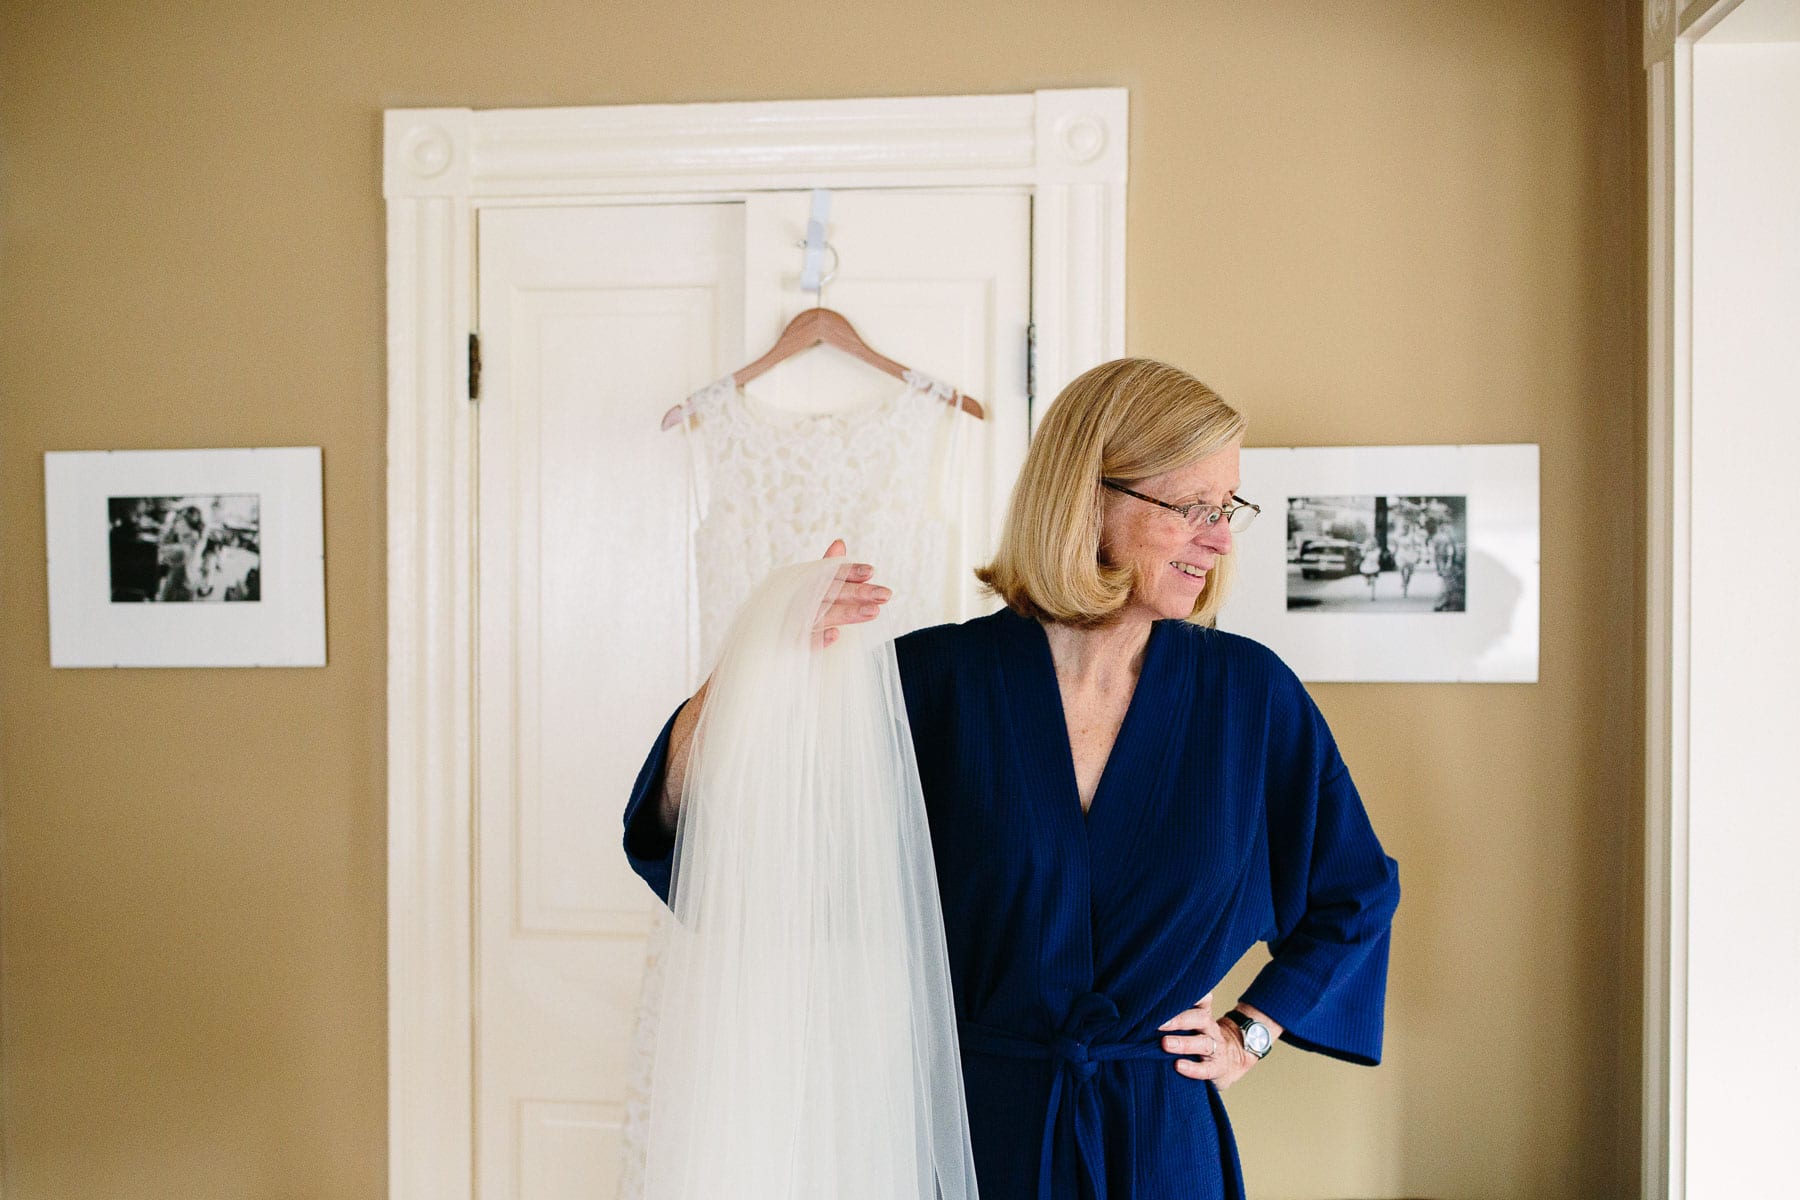 scenes from getting ready for a wedding in bride's childhood home | Kelly Benvenuto Photography